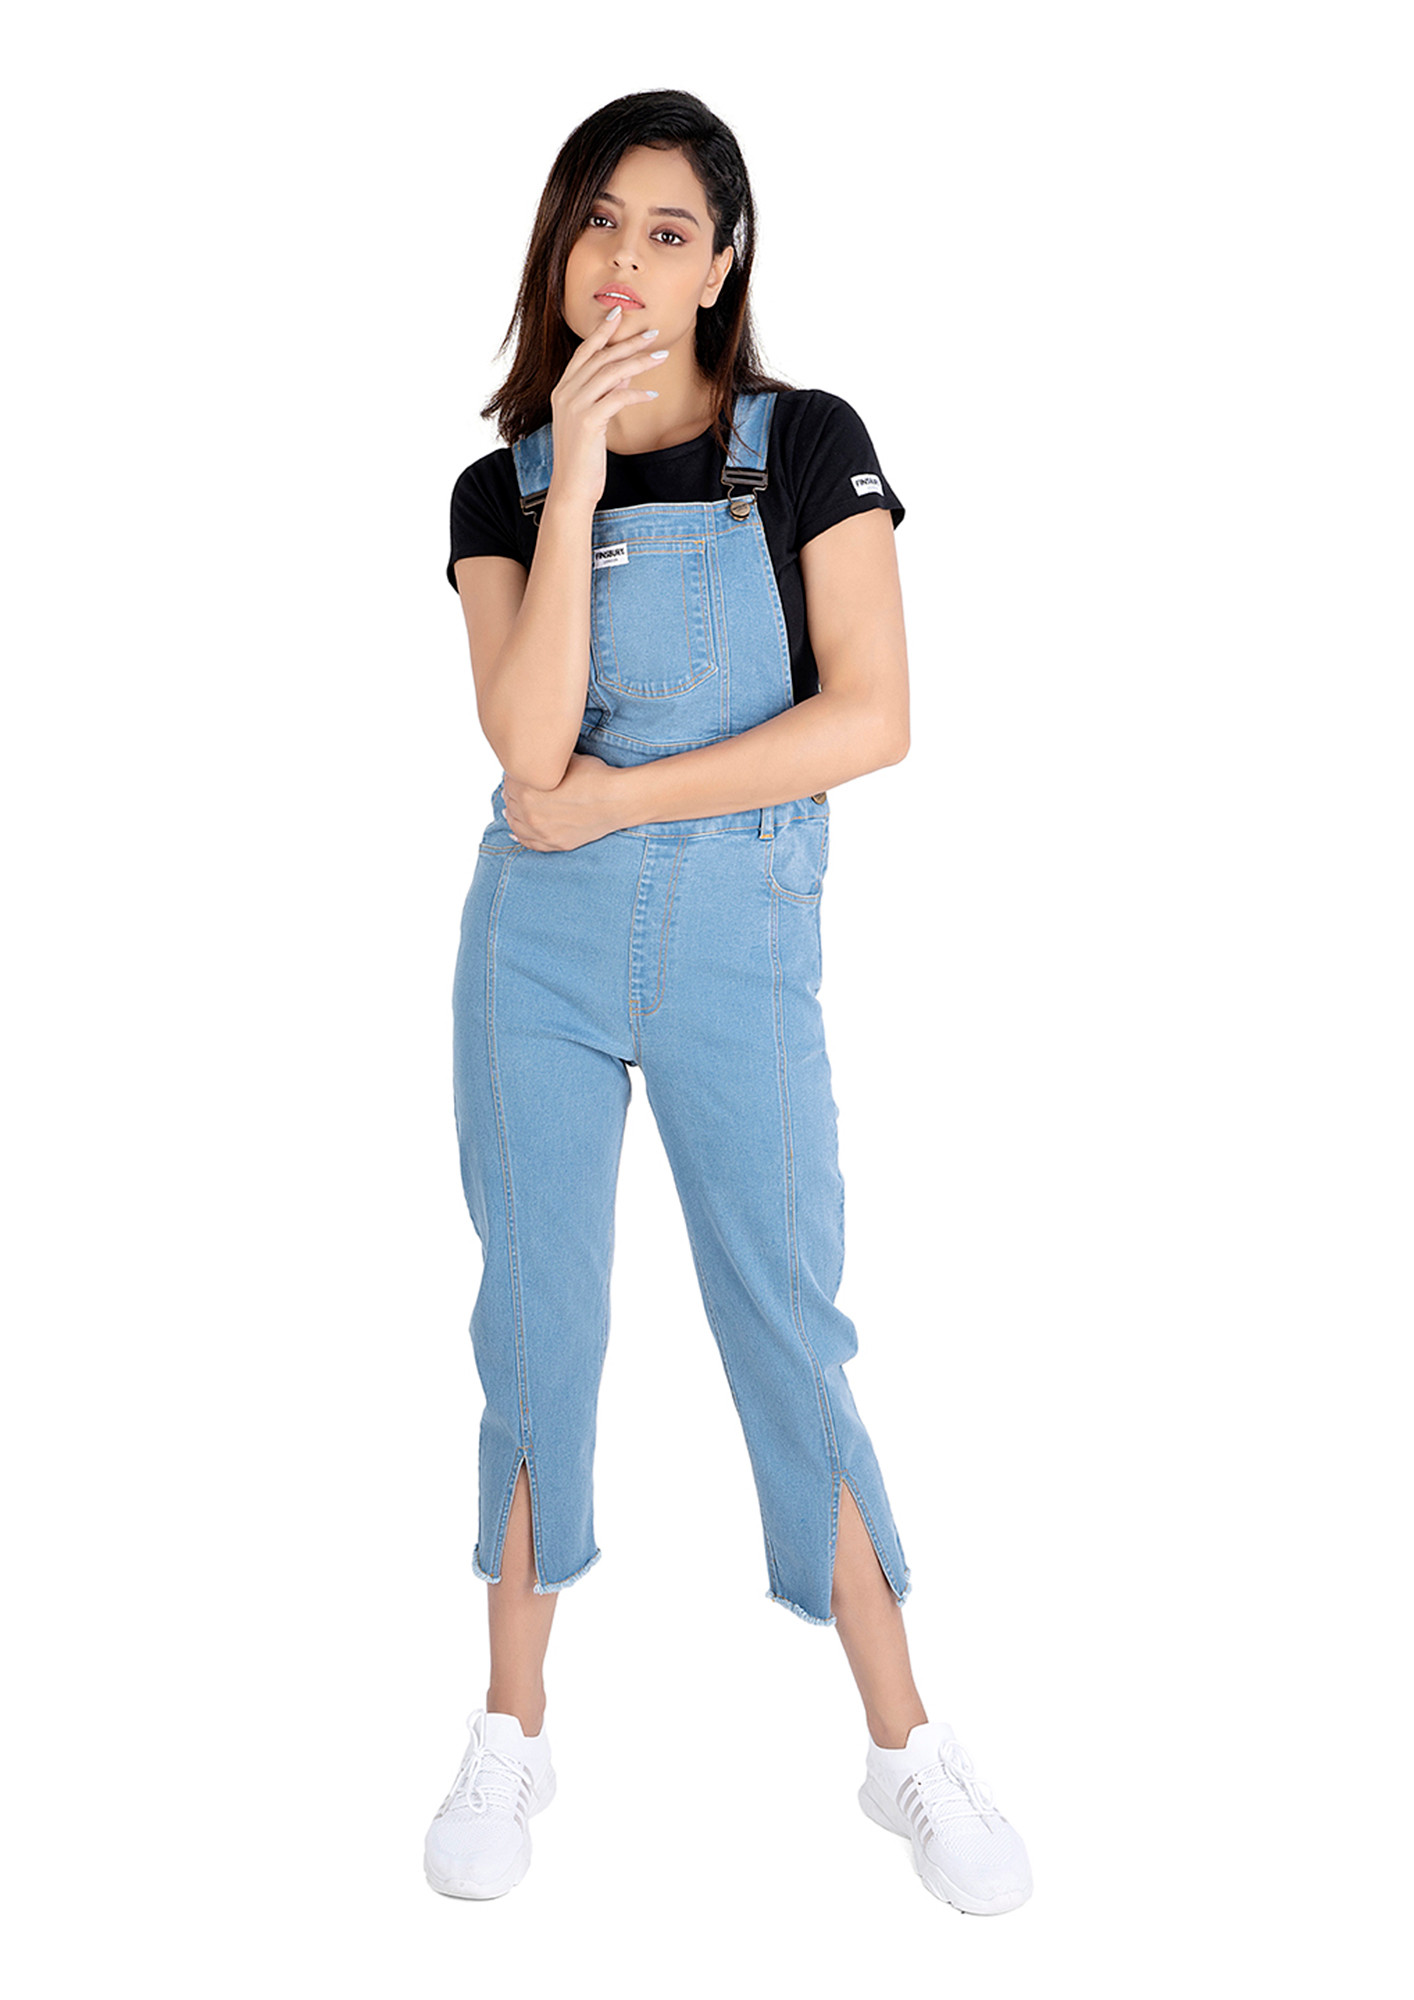 Buy Homgee Fashion Women Denim Overalls Ripped Stretch Dungarees High Waist  Long Jeans Pencil Pants Rompers Jumpsuit Blue at Amazon.in